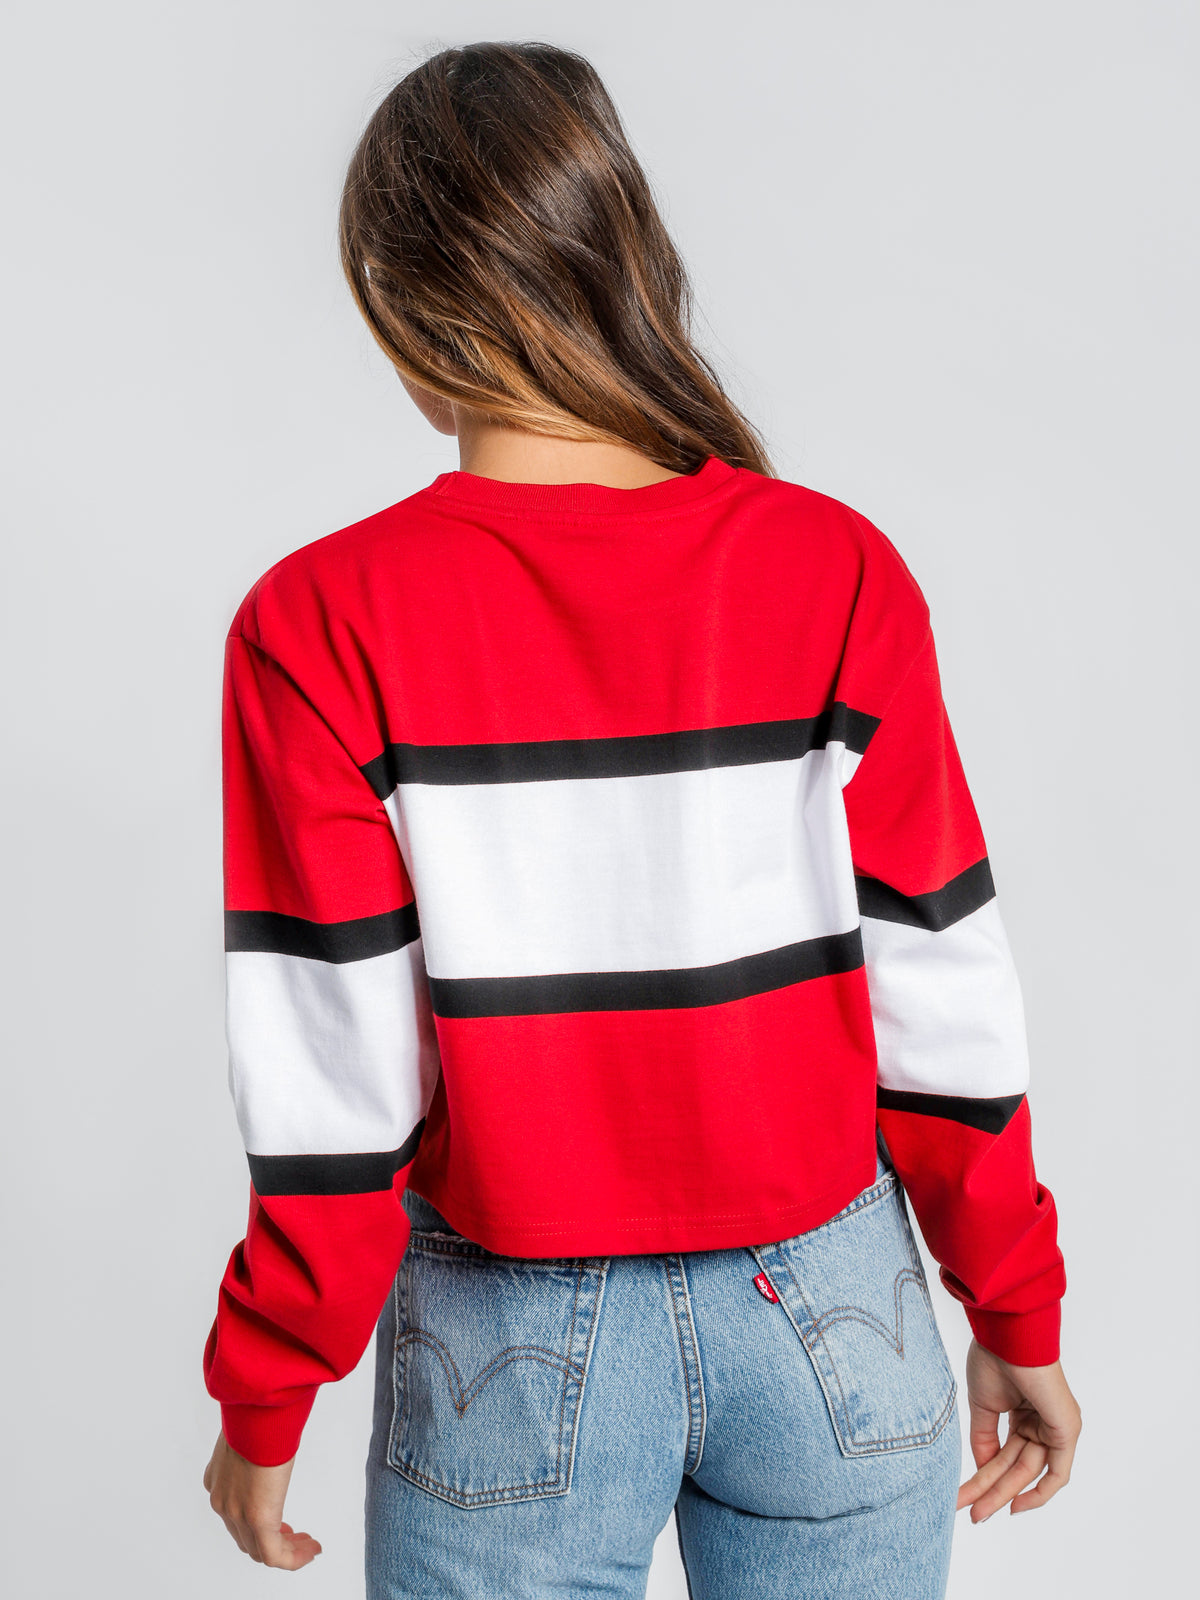 Hudson Long Sleeve T-Shirt in Red